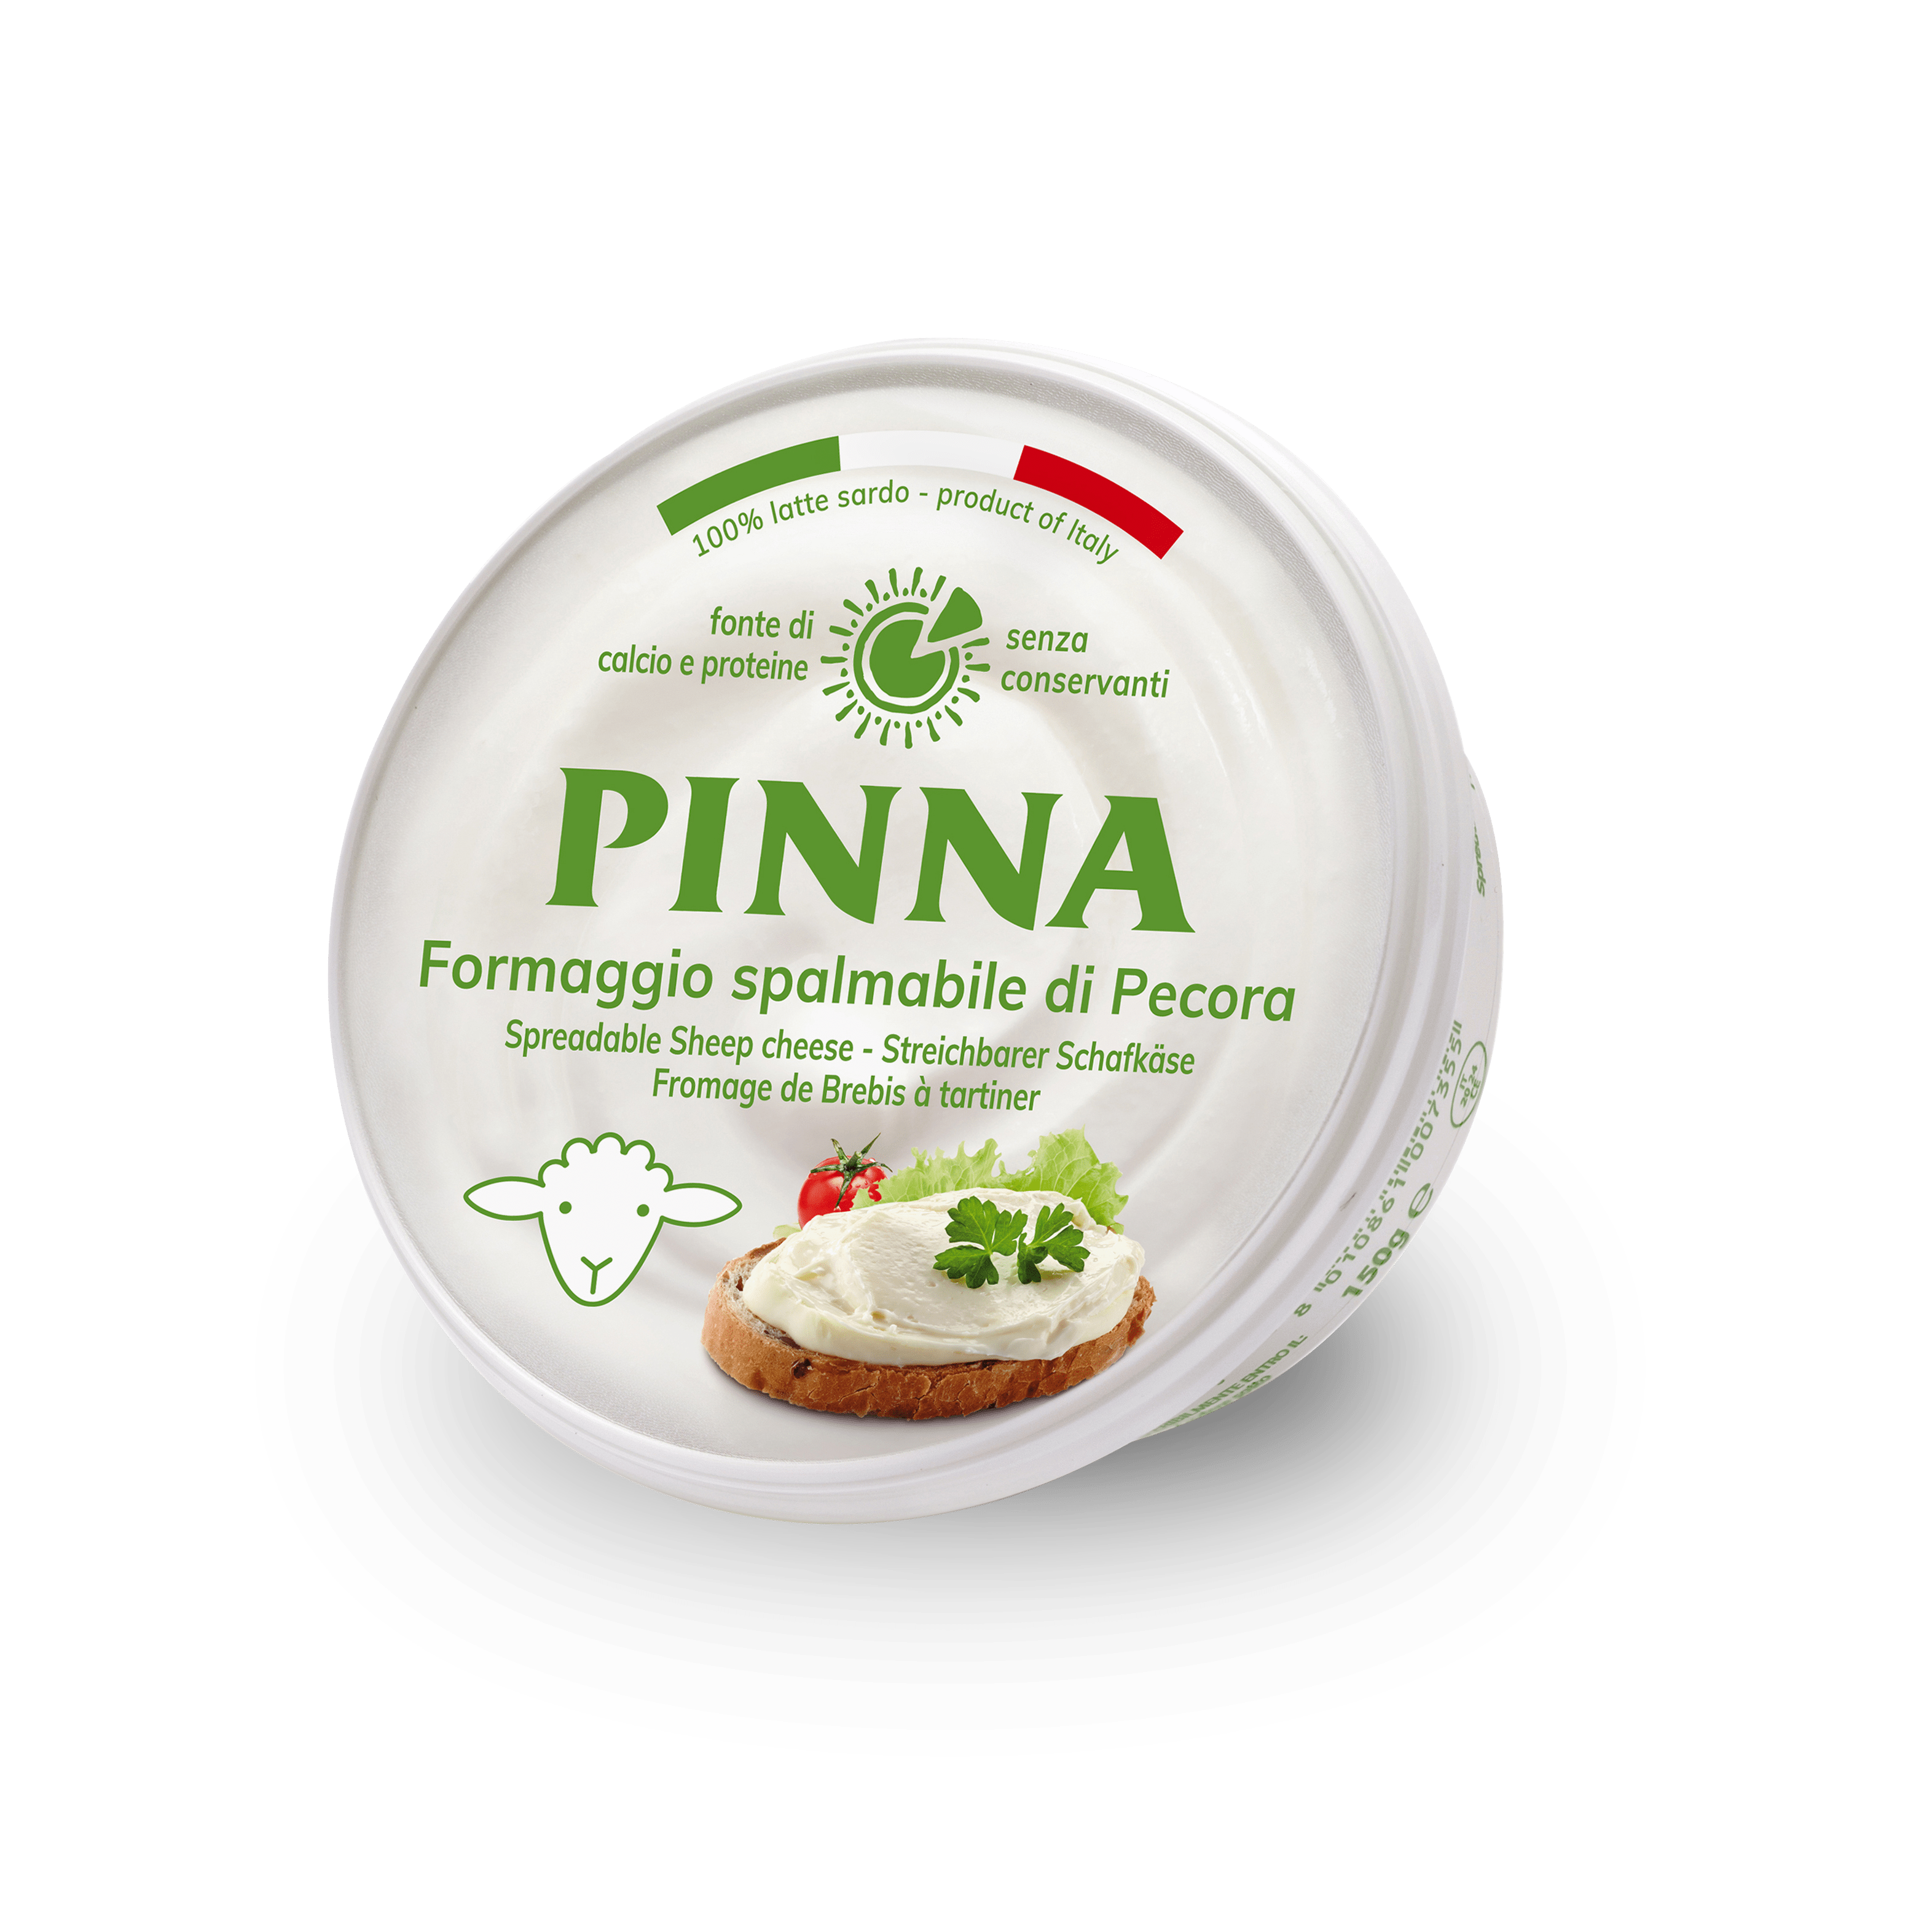 PINNA SHEEP CHEESE FOR SPREADING